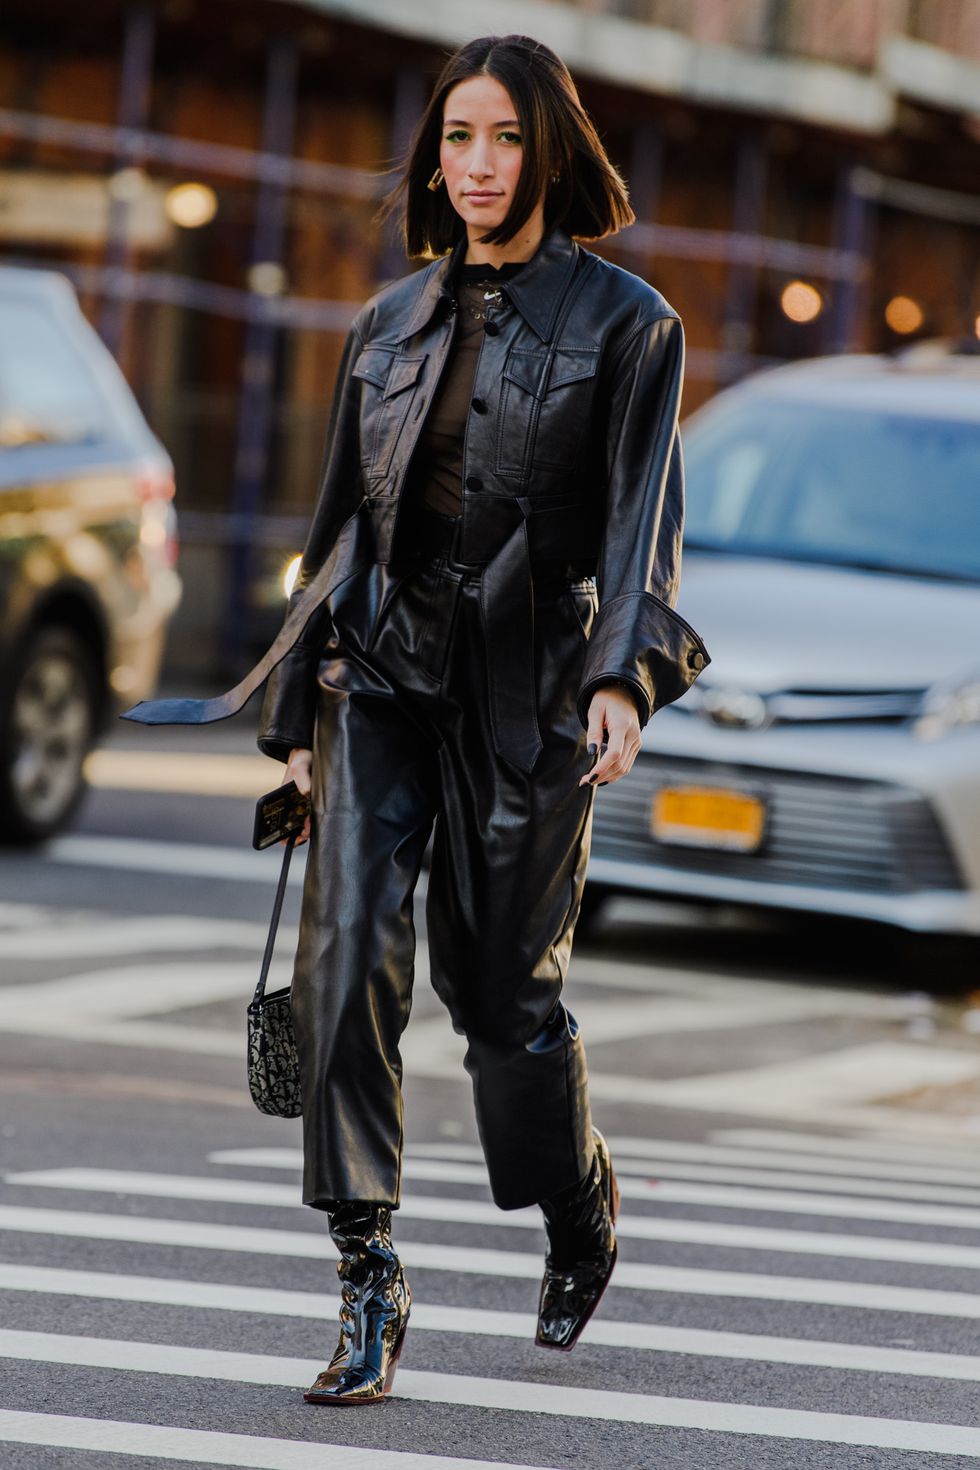 Faux Leather Trend: How to Master It